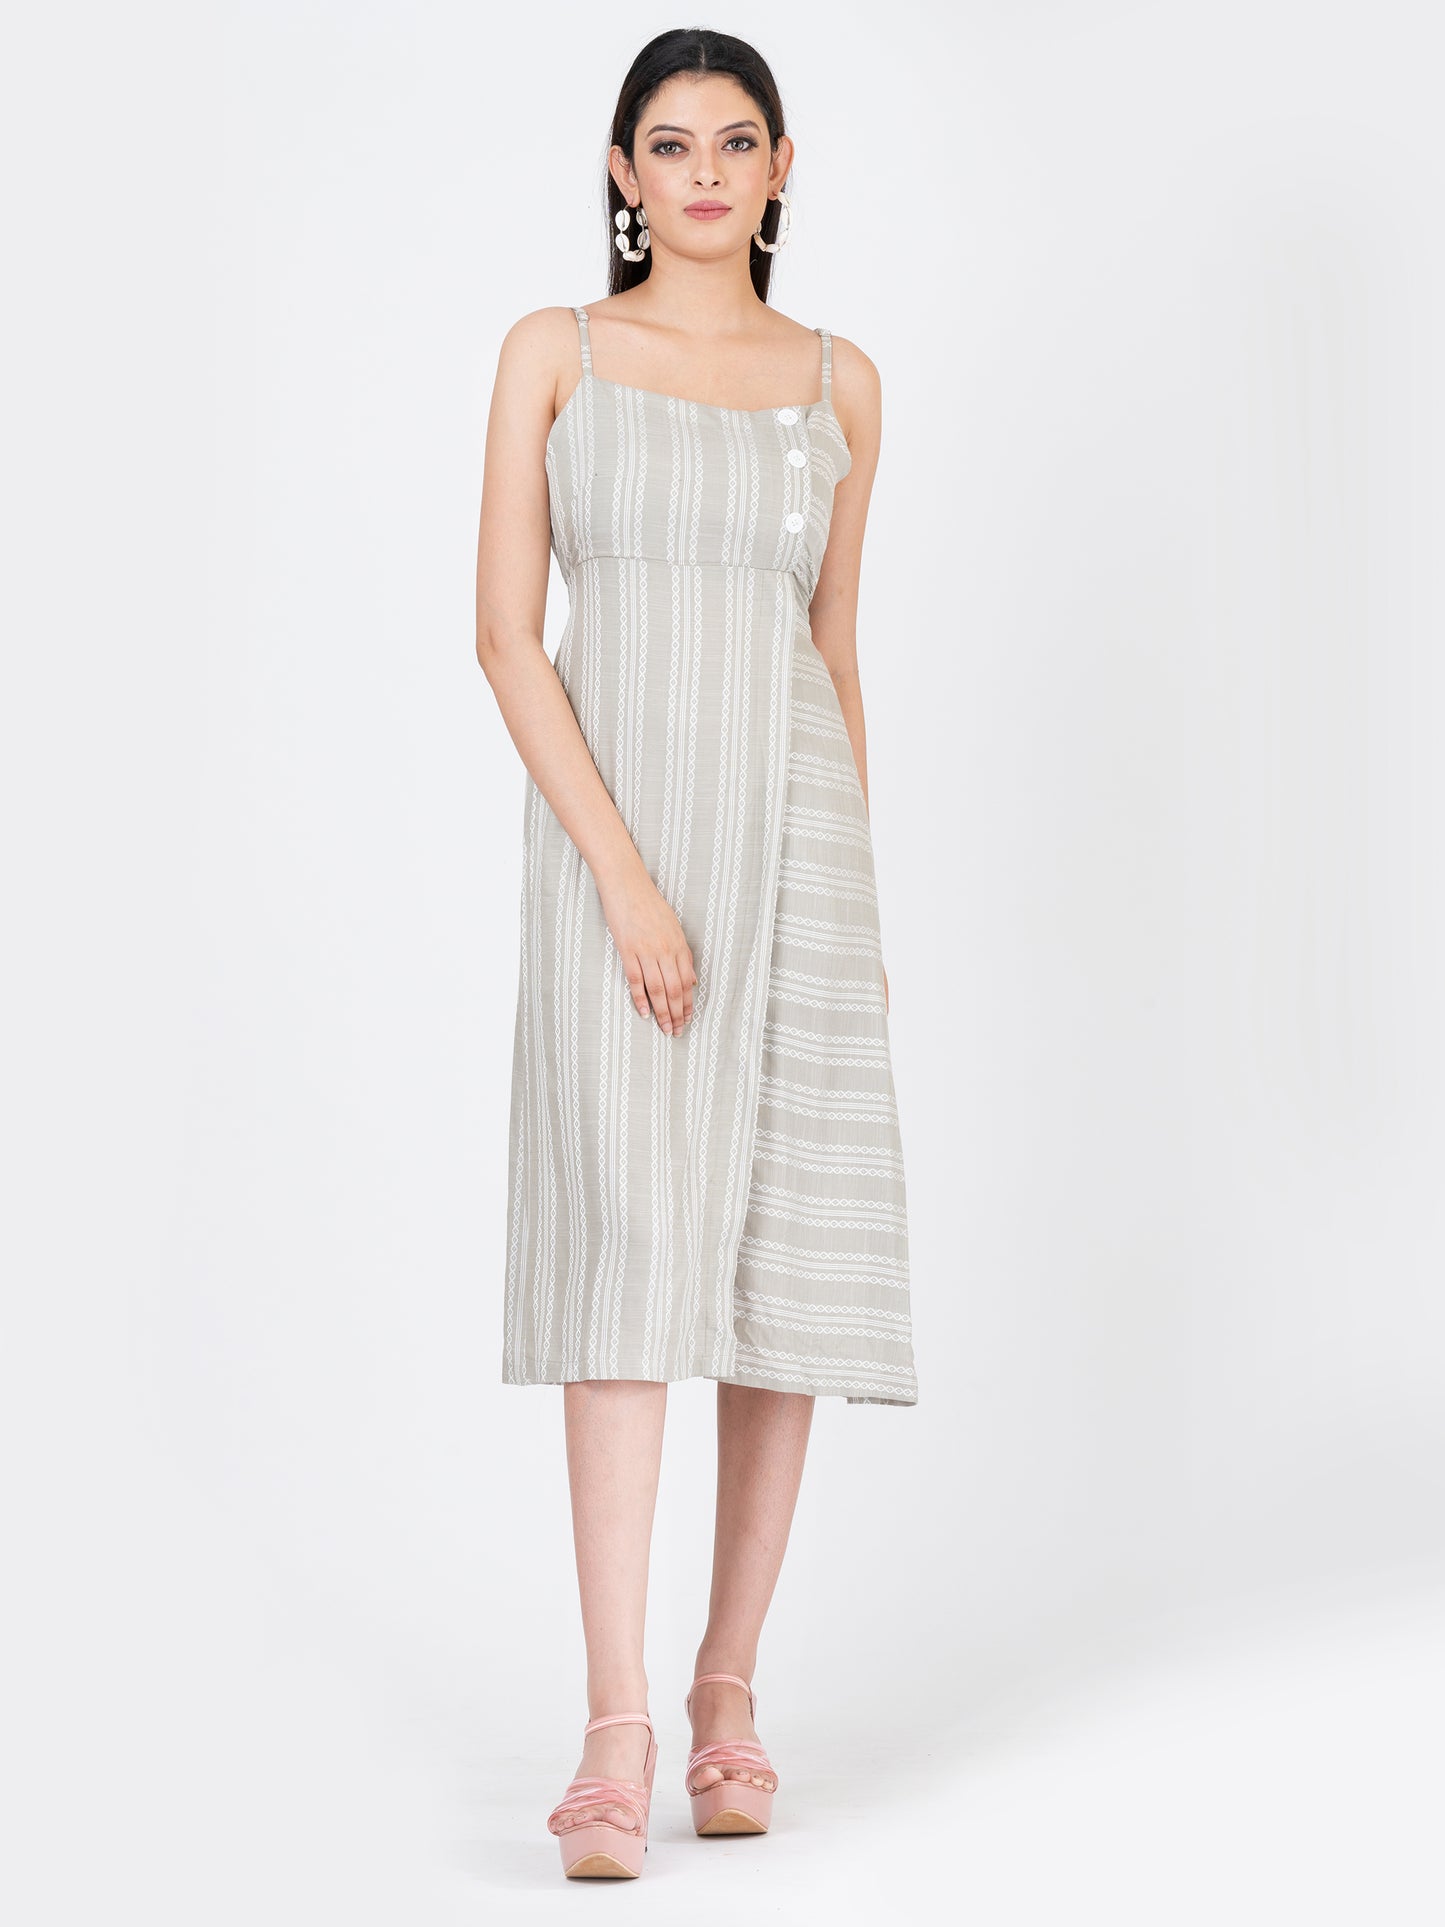 Women’s Soft Cotton Spaghetti Strap Dress With Lining Attached